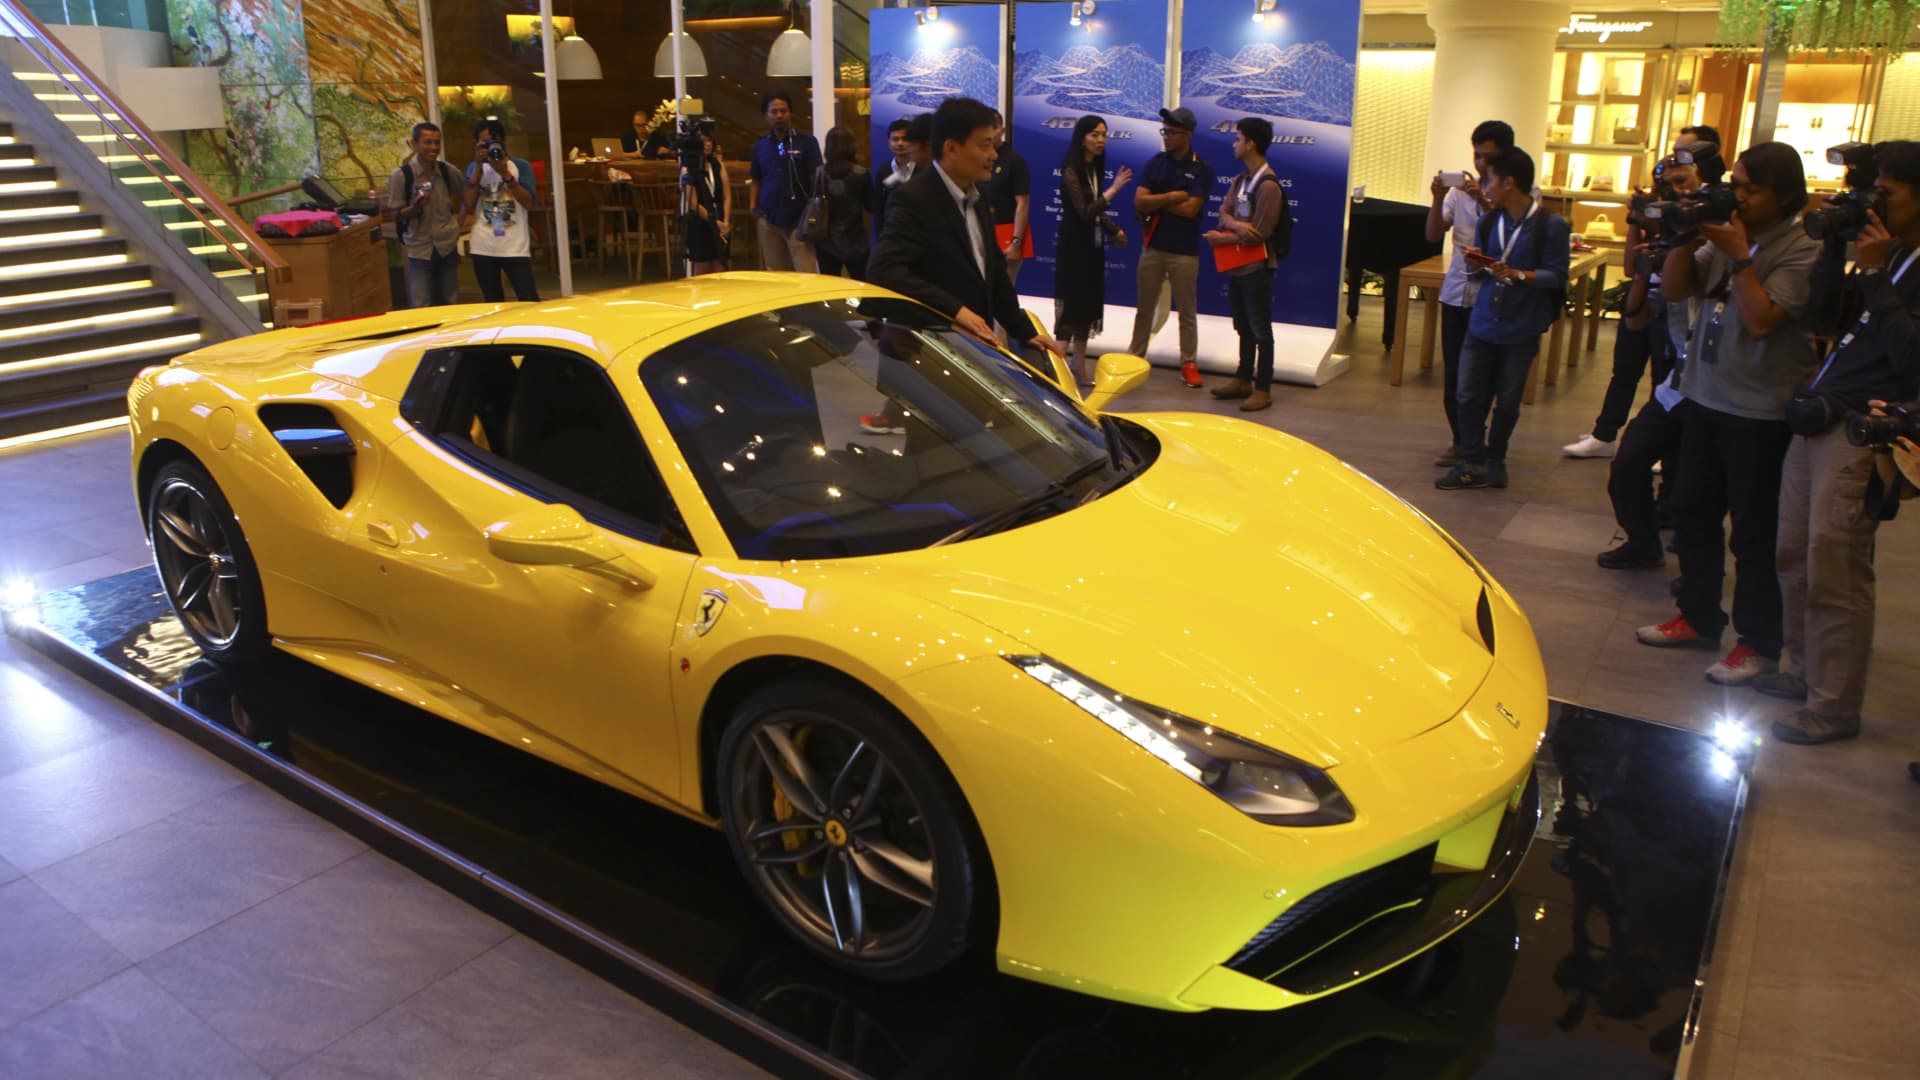 The Nightfall Group can arrange exotic car rentals, like a Ferrari 488 Spider, during vacations.